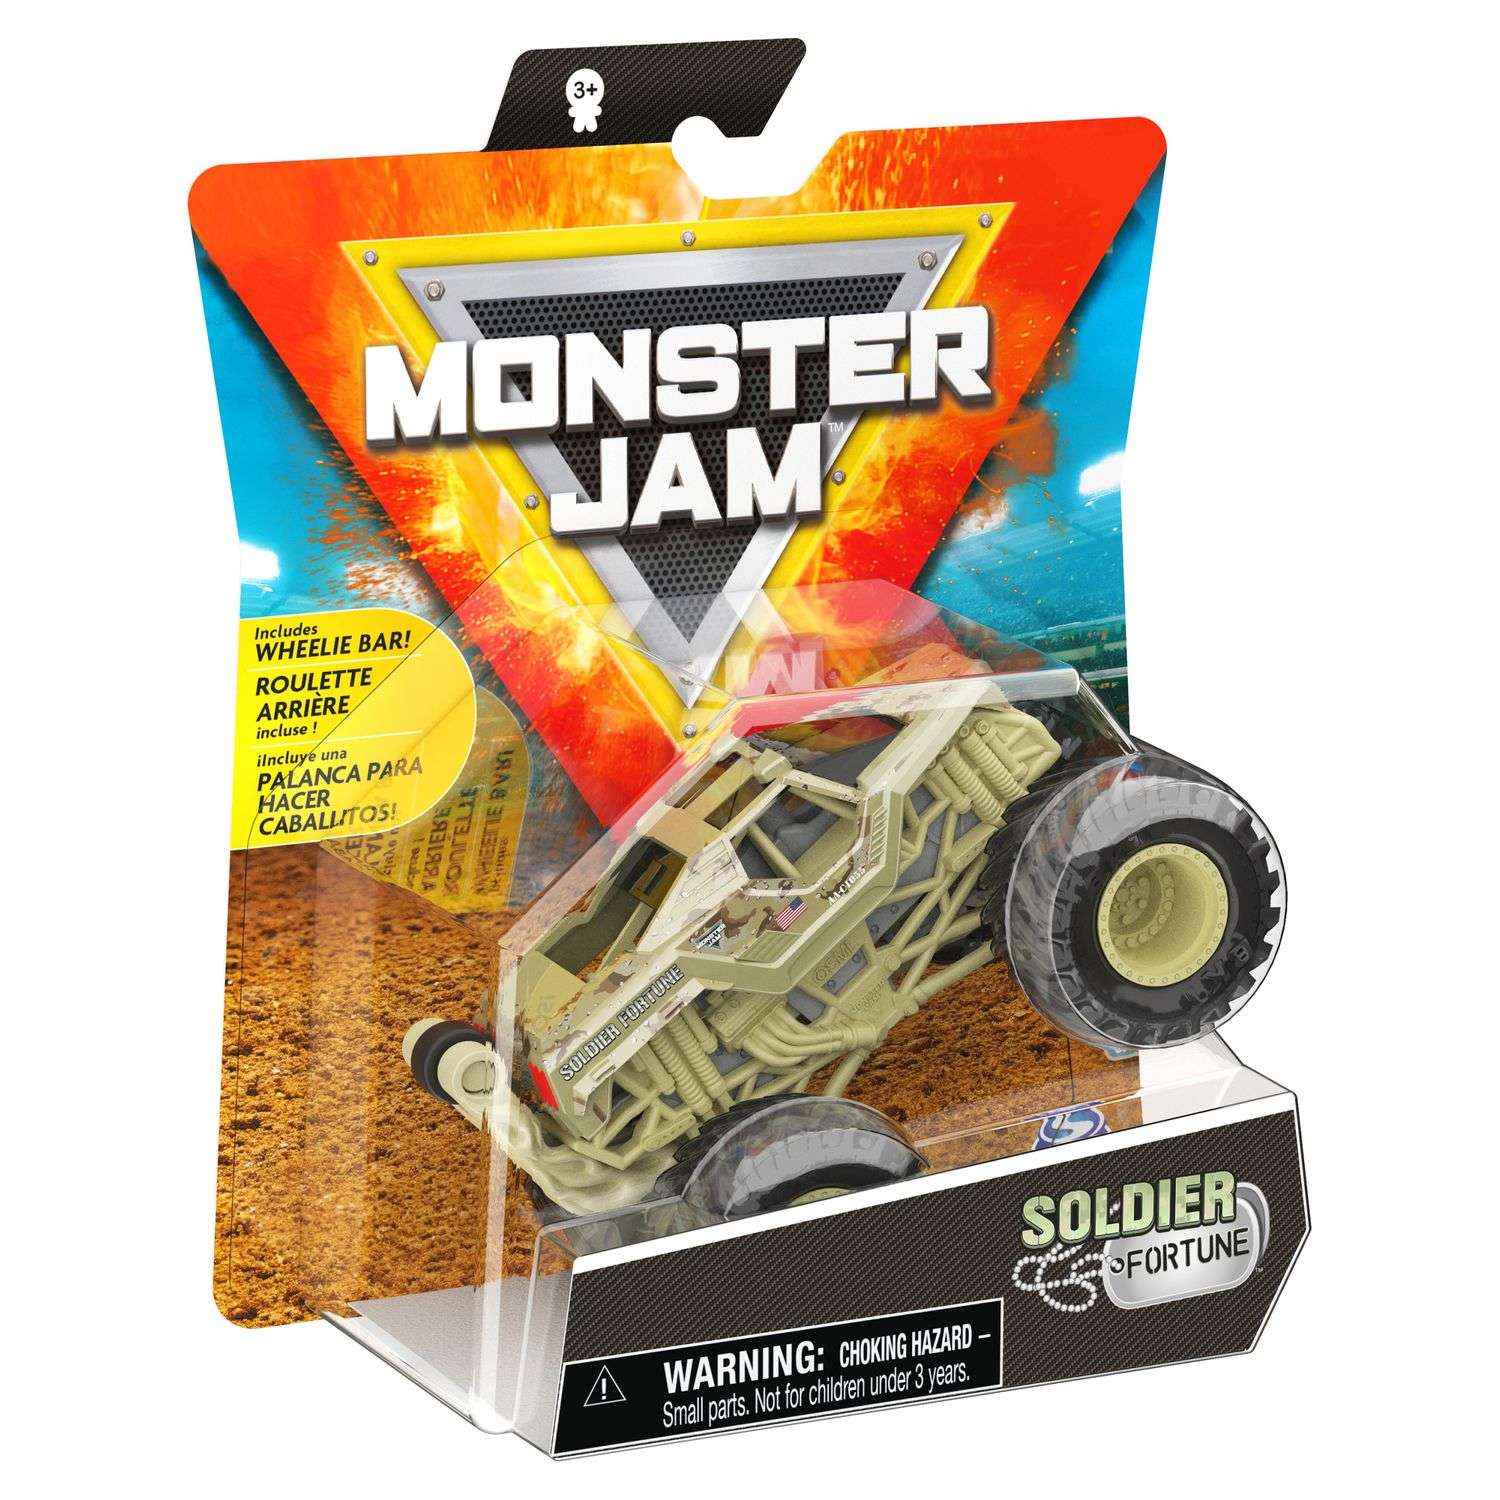 Машинка Monster Jam 1:64 Soldier of Fortune 6060868 6060868 - фото 3